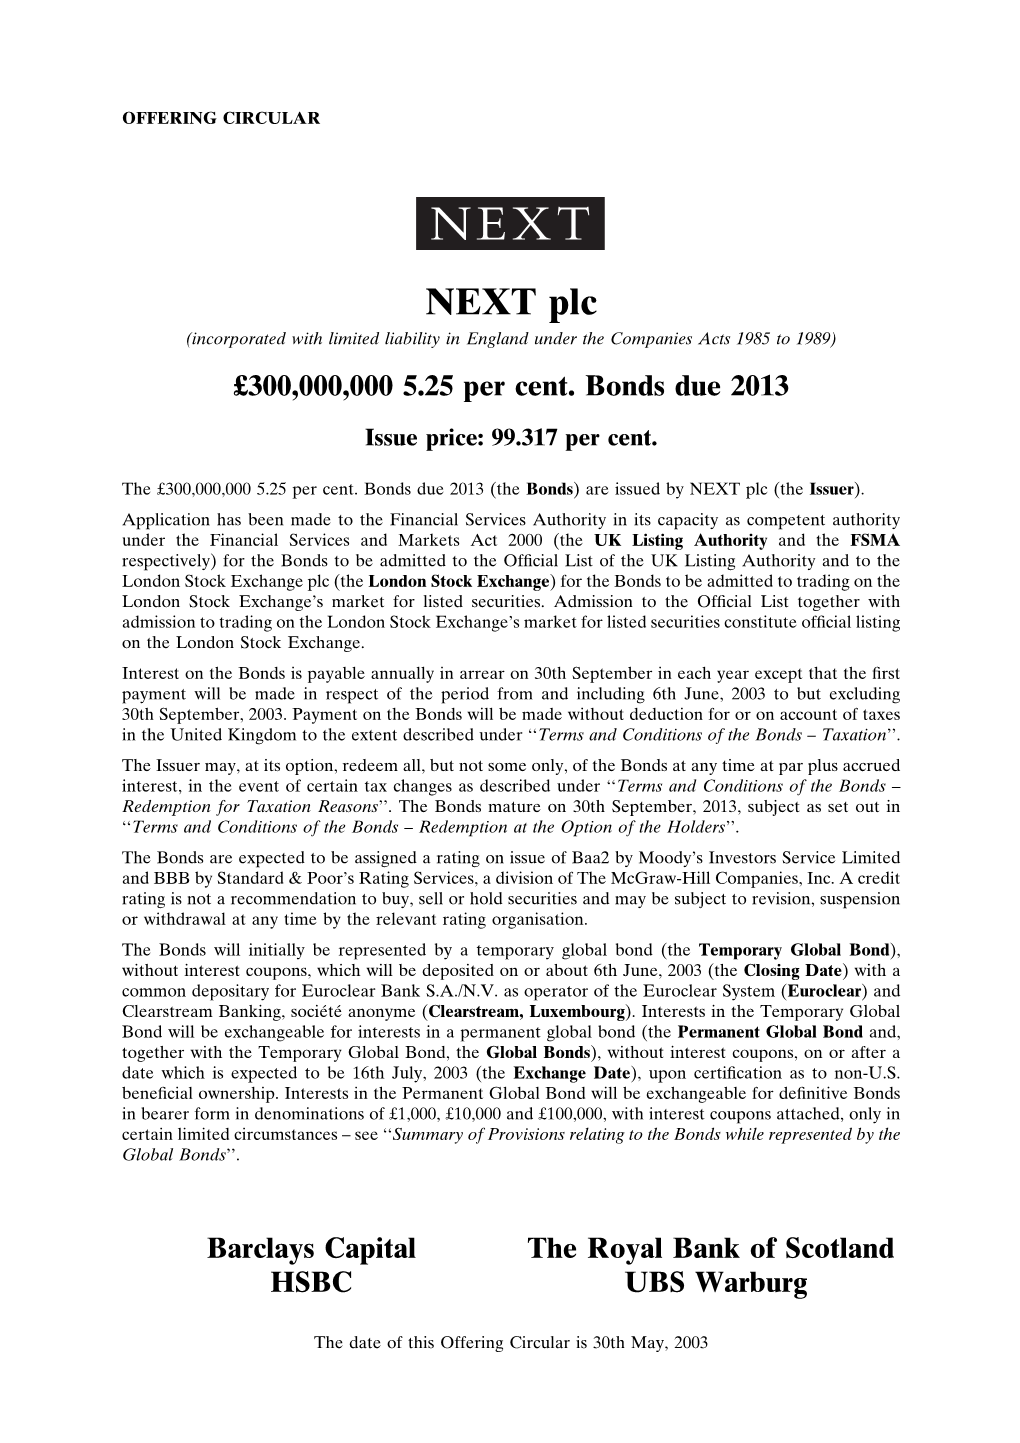 NEXT Plc (Incorporated with Limited Liability in England Under the Companies Acts 1985 to 1989) £300,000,000 5.25 Per Cent